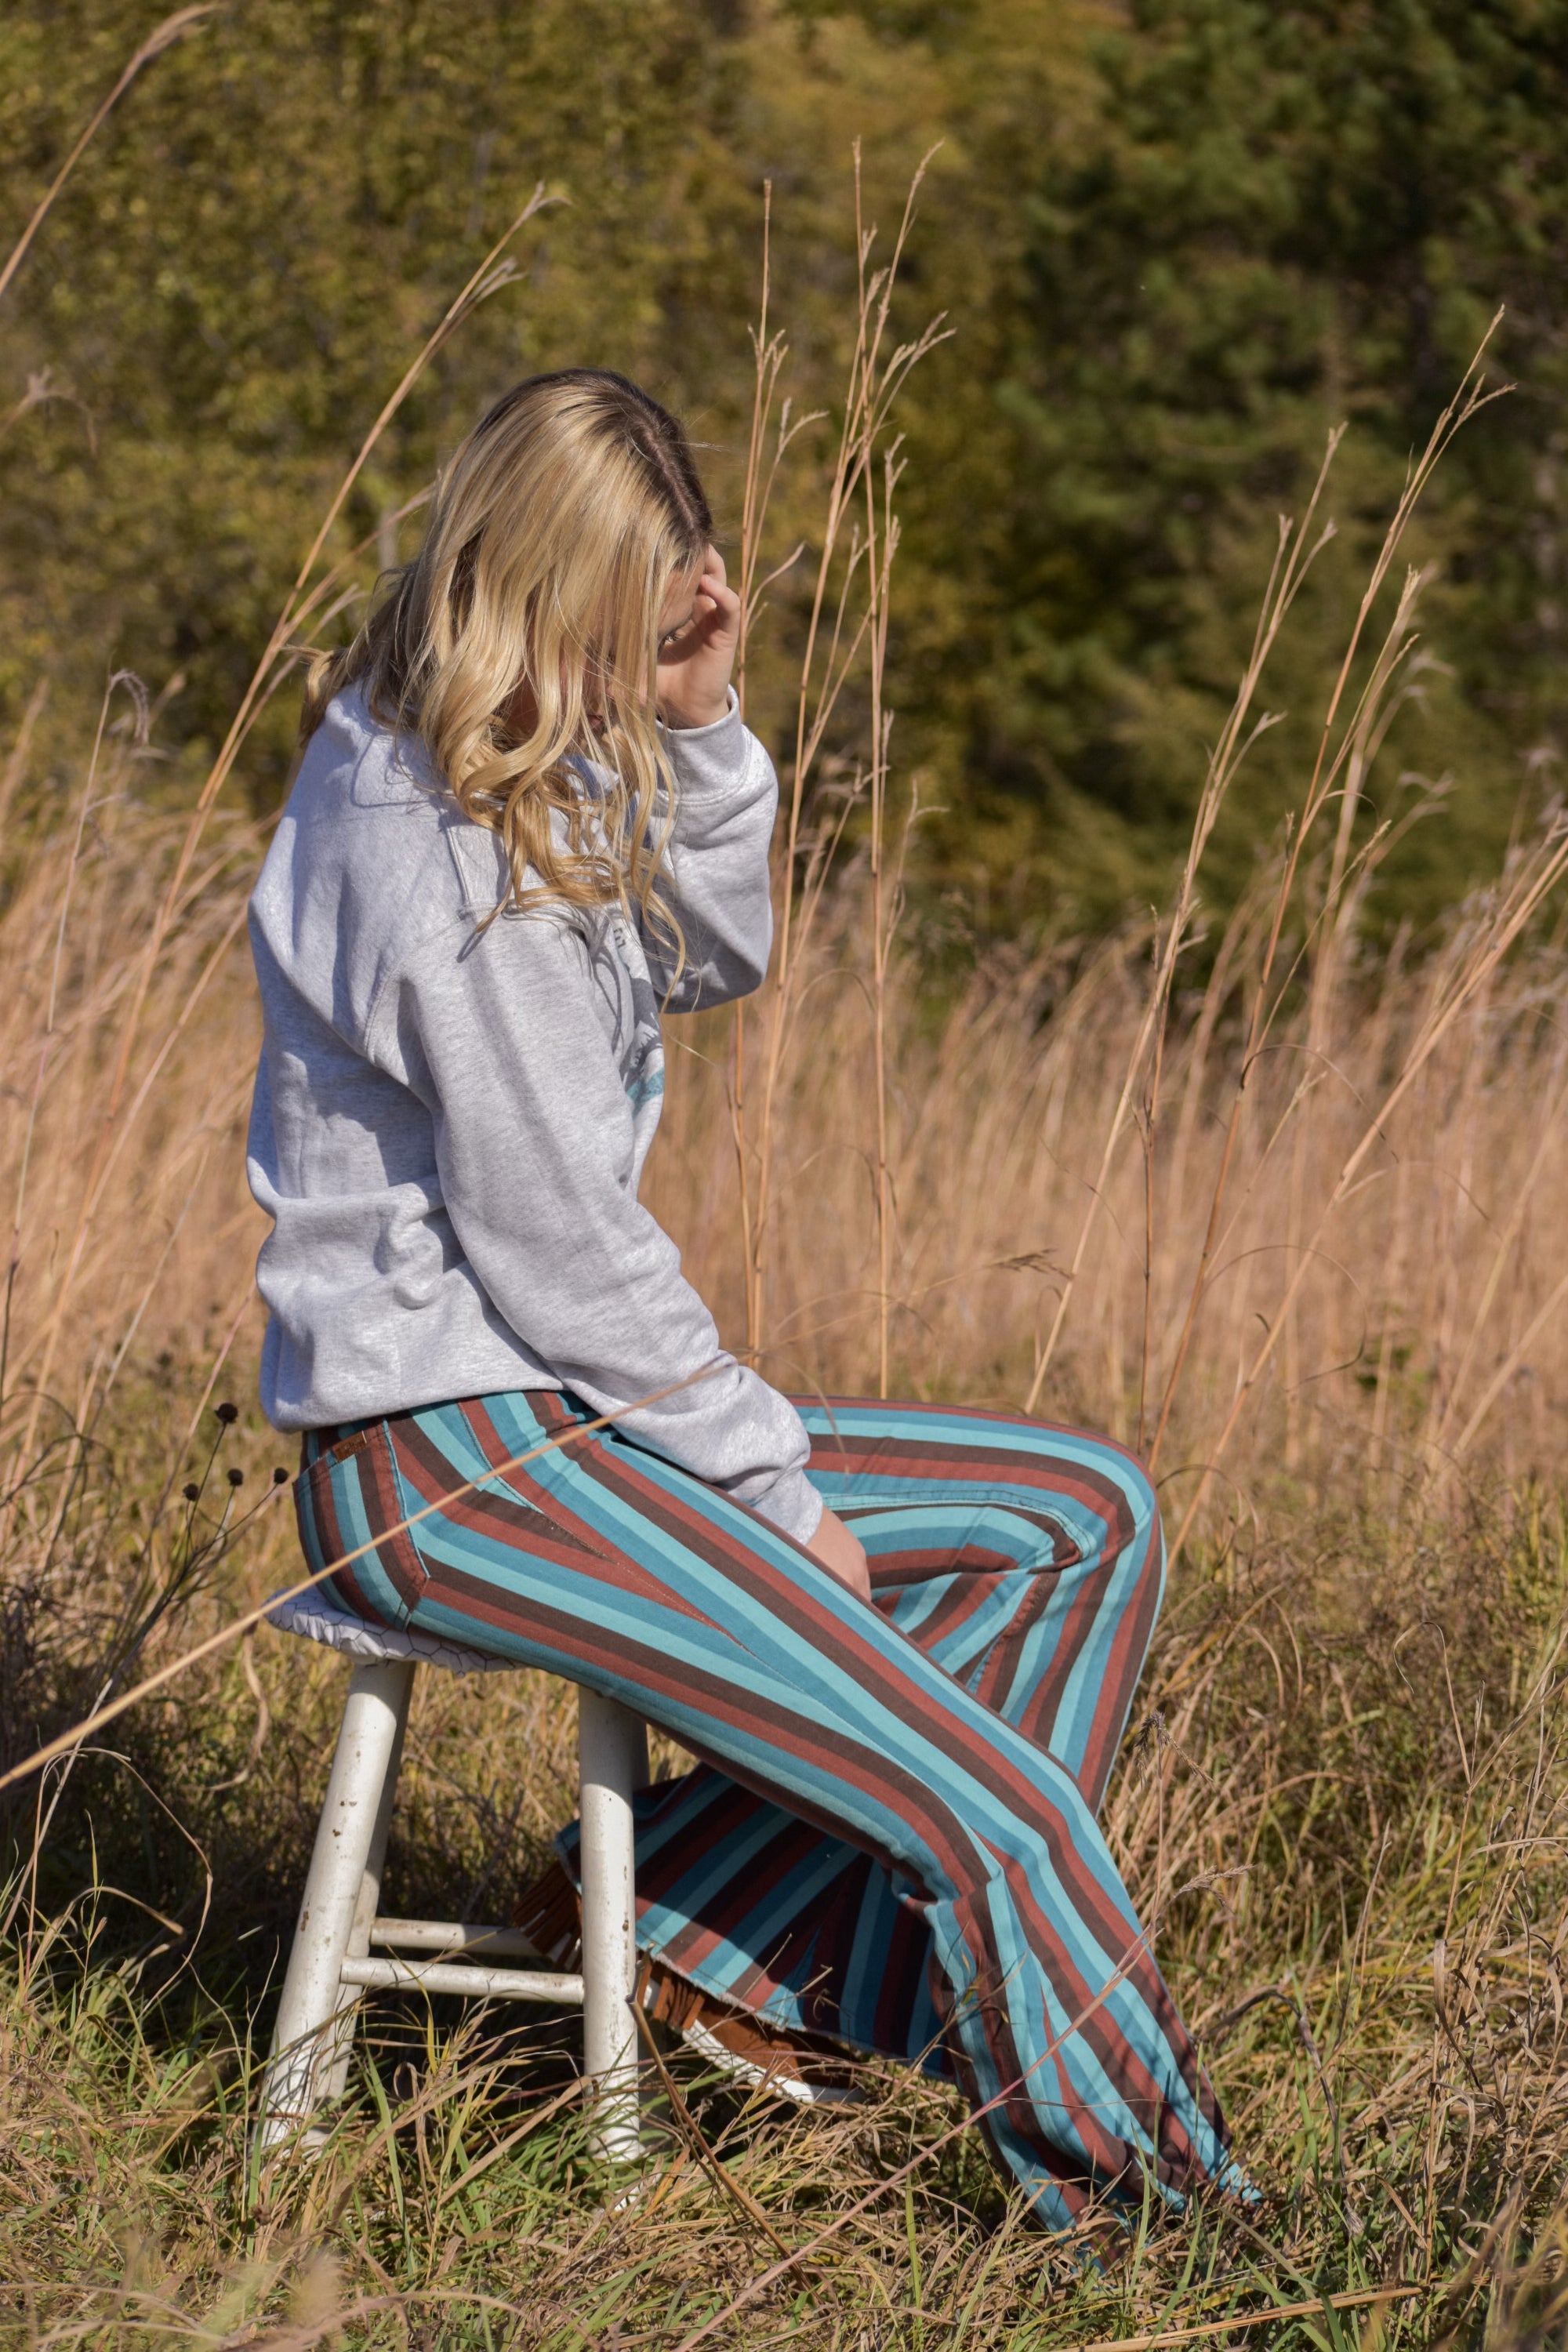 Turquoise + Brown Striped Bell Bottoms